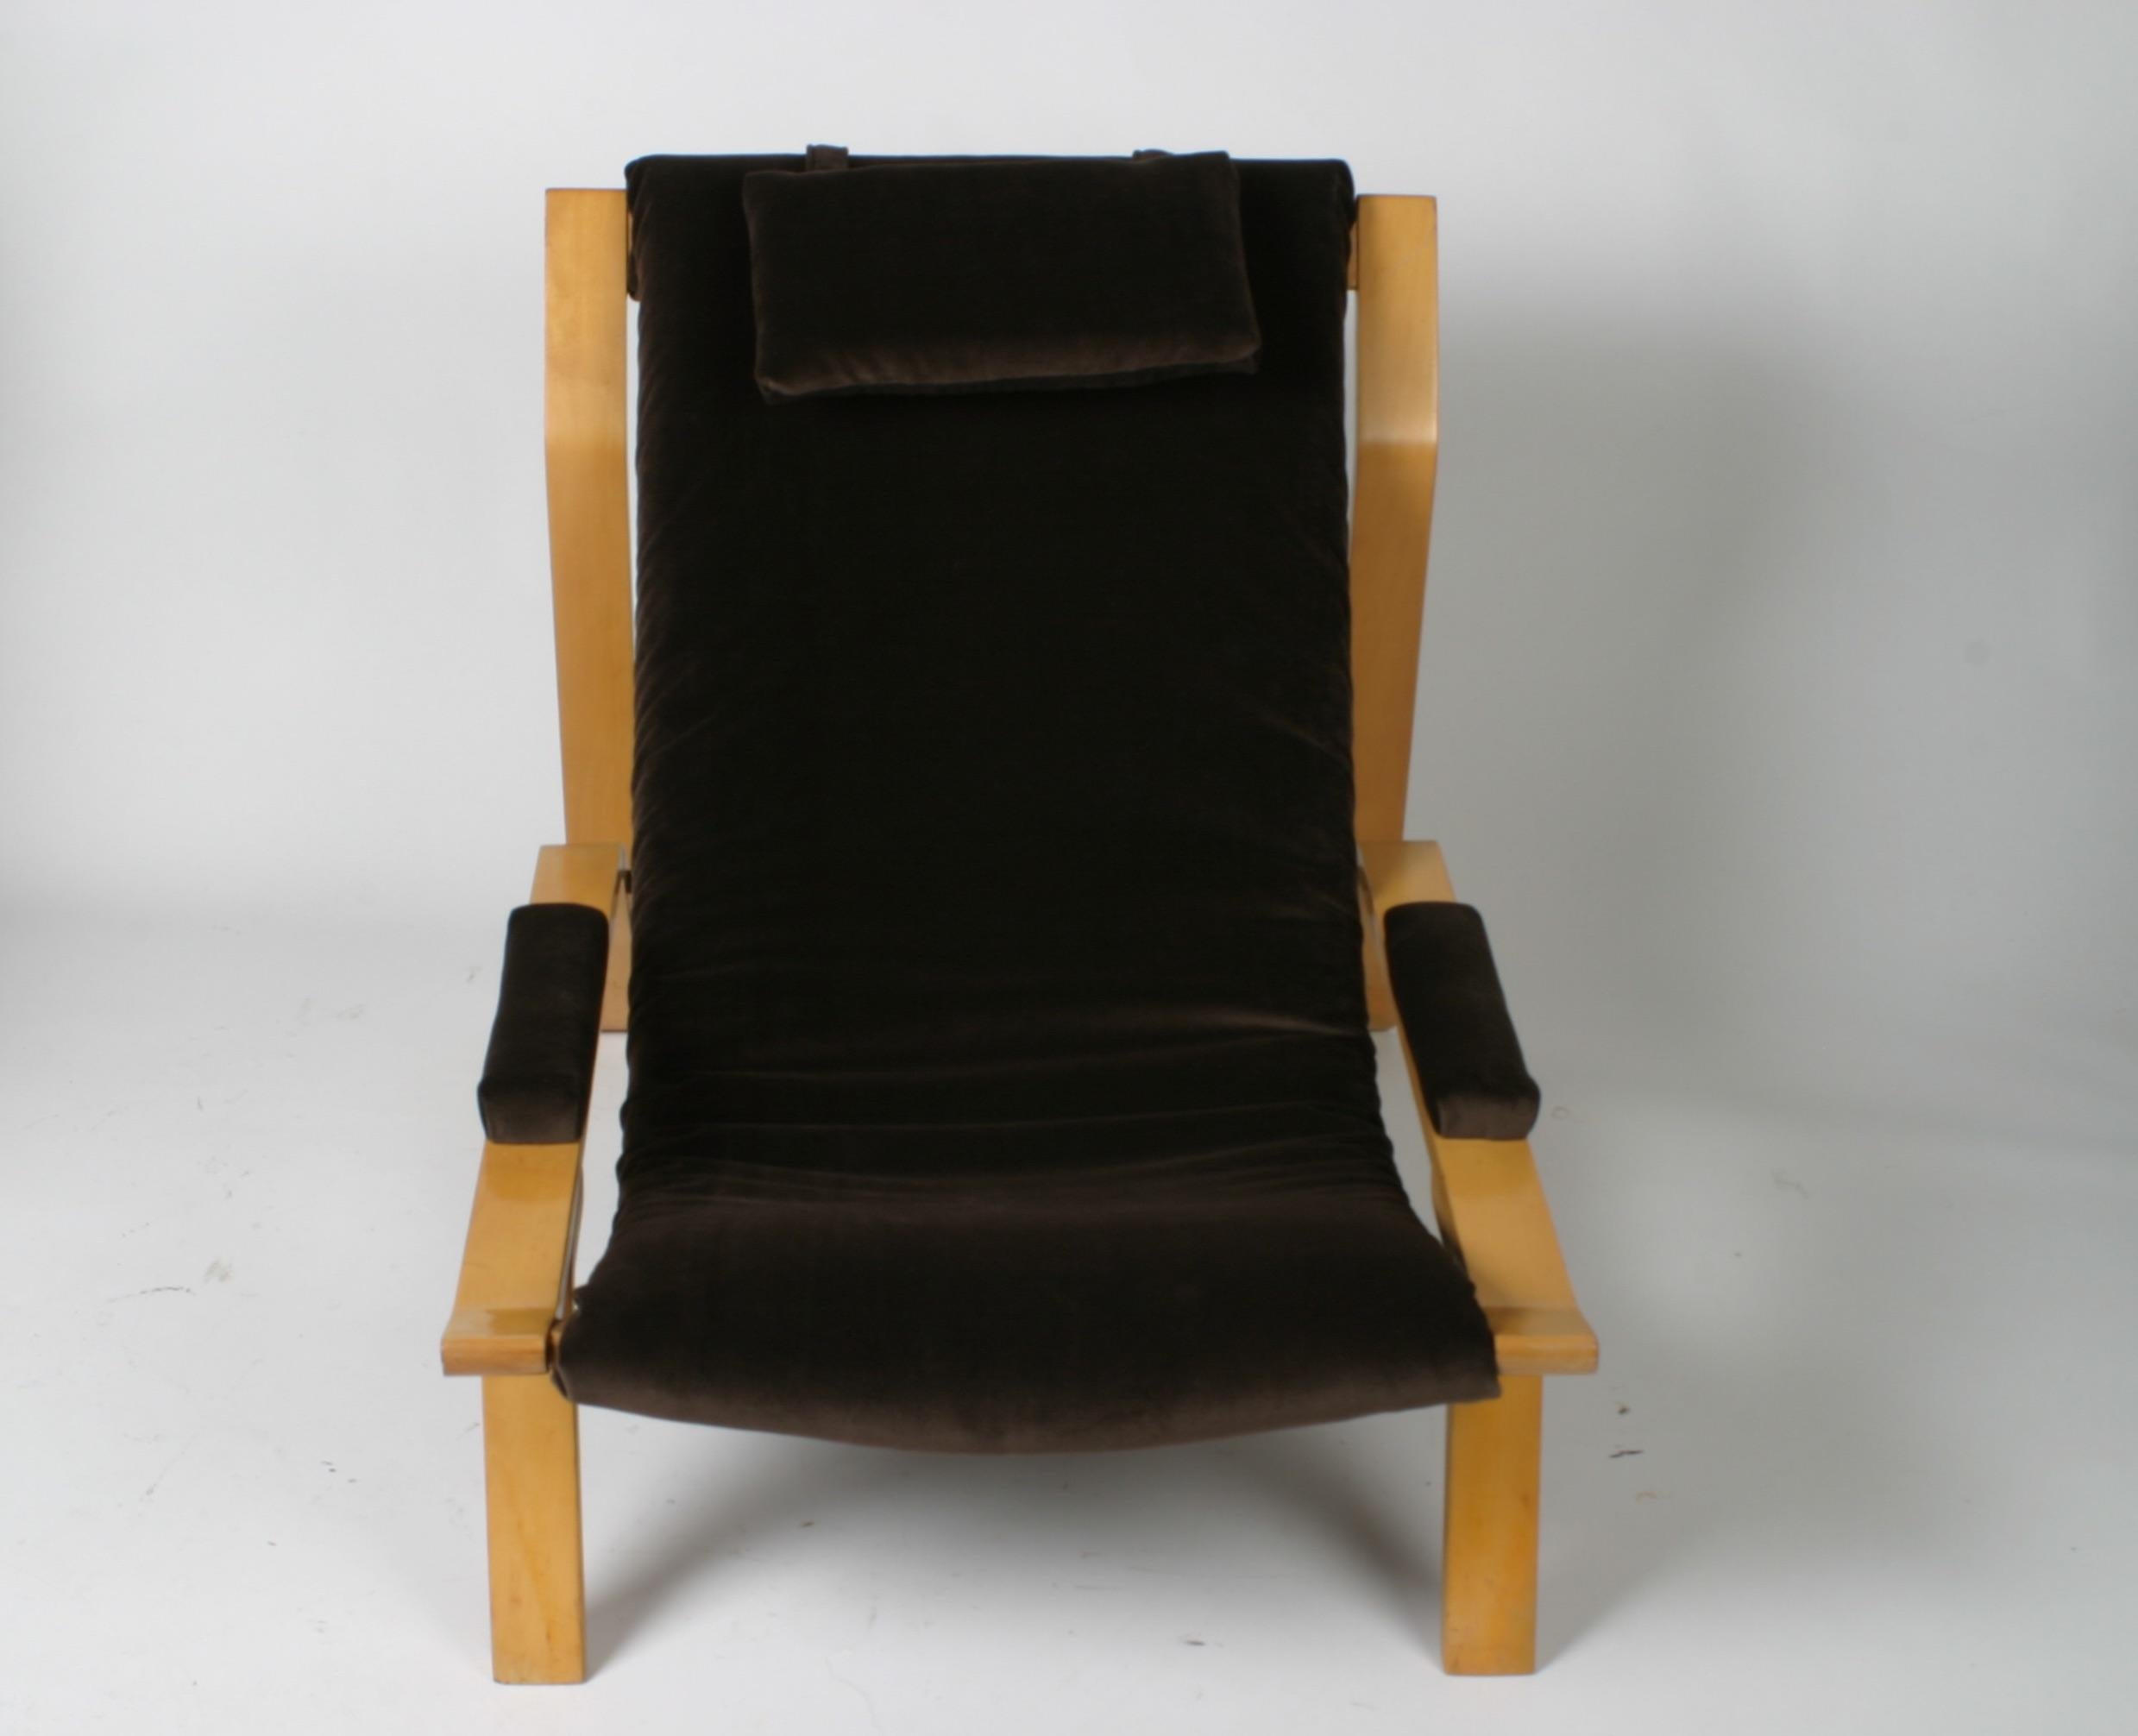 Rare Pair of Harvey Probber Sling Chair, circa 1948 For Sale 2